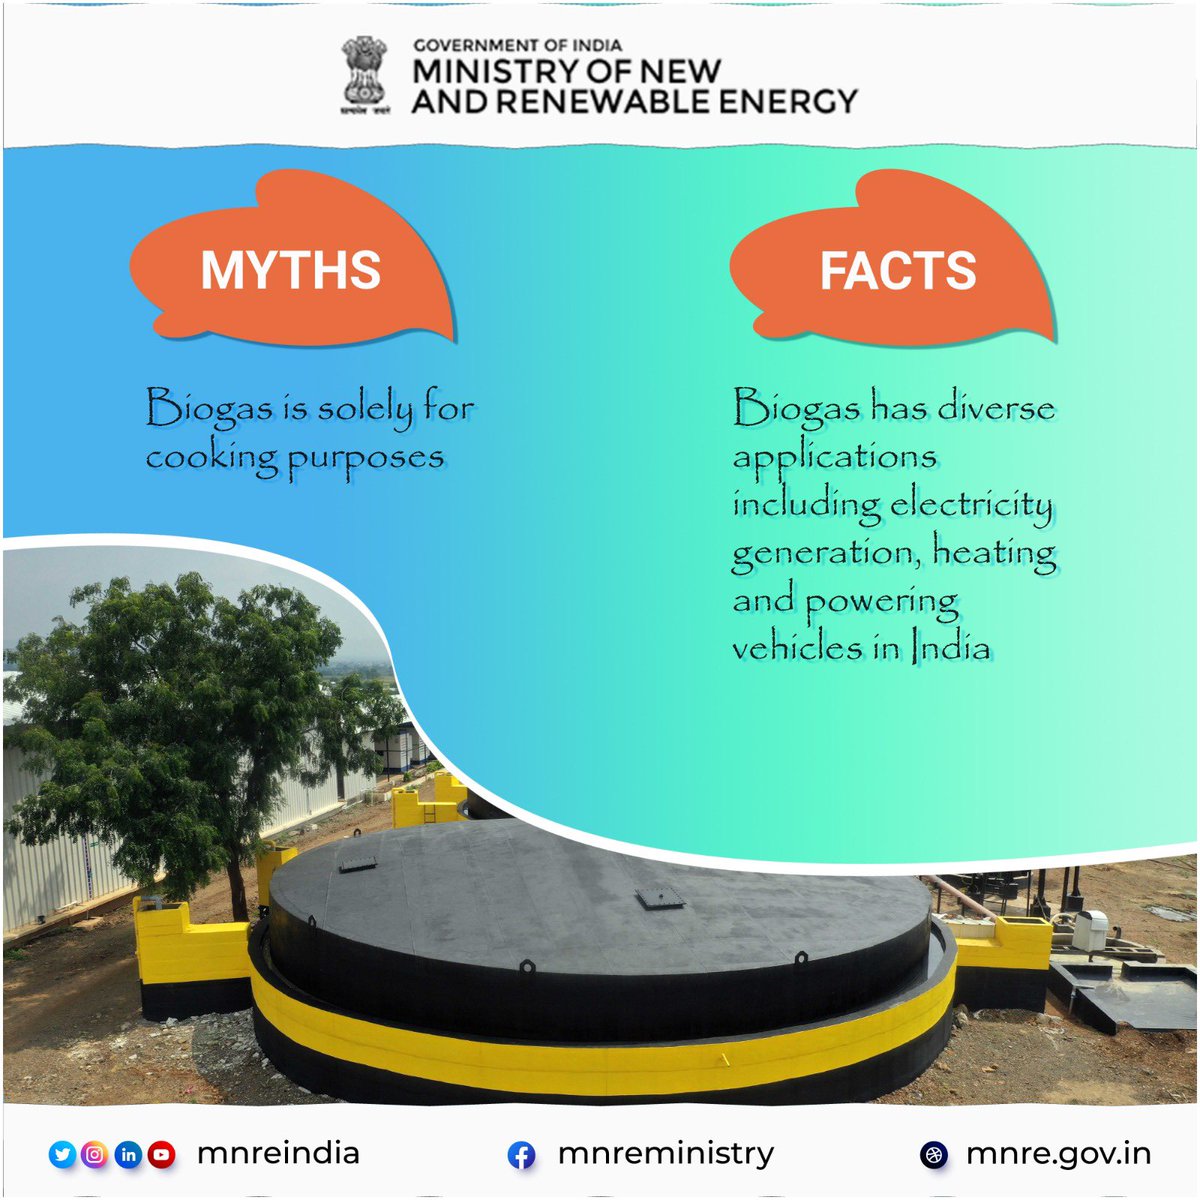 Myth busted! Biogas isn't just for cooking! While it's great for the kitchen, did you know it also powers electricity generation, heating, and even vehicles in India? Tell us in the comments: Did you know biogas had so many uses? #Biogas #RenewableEnergy #MNREIndia